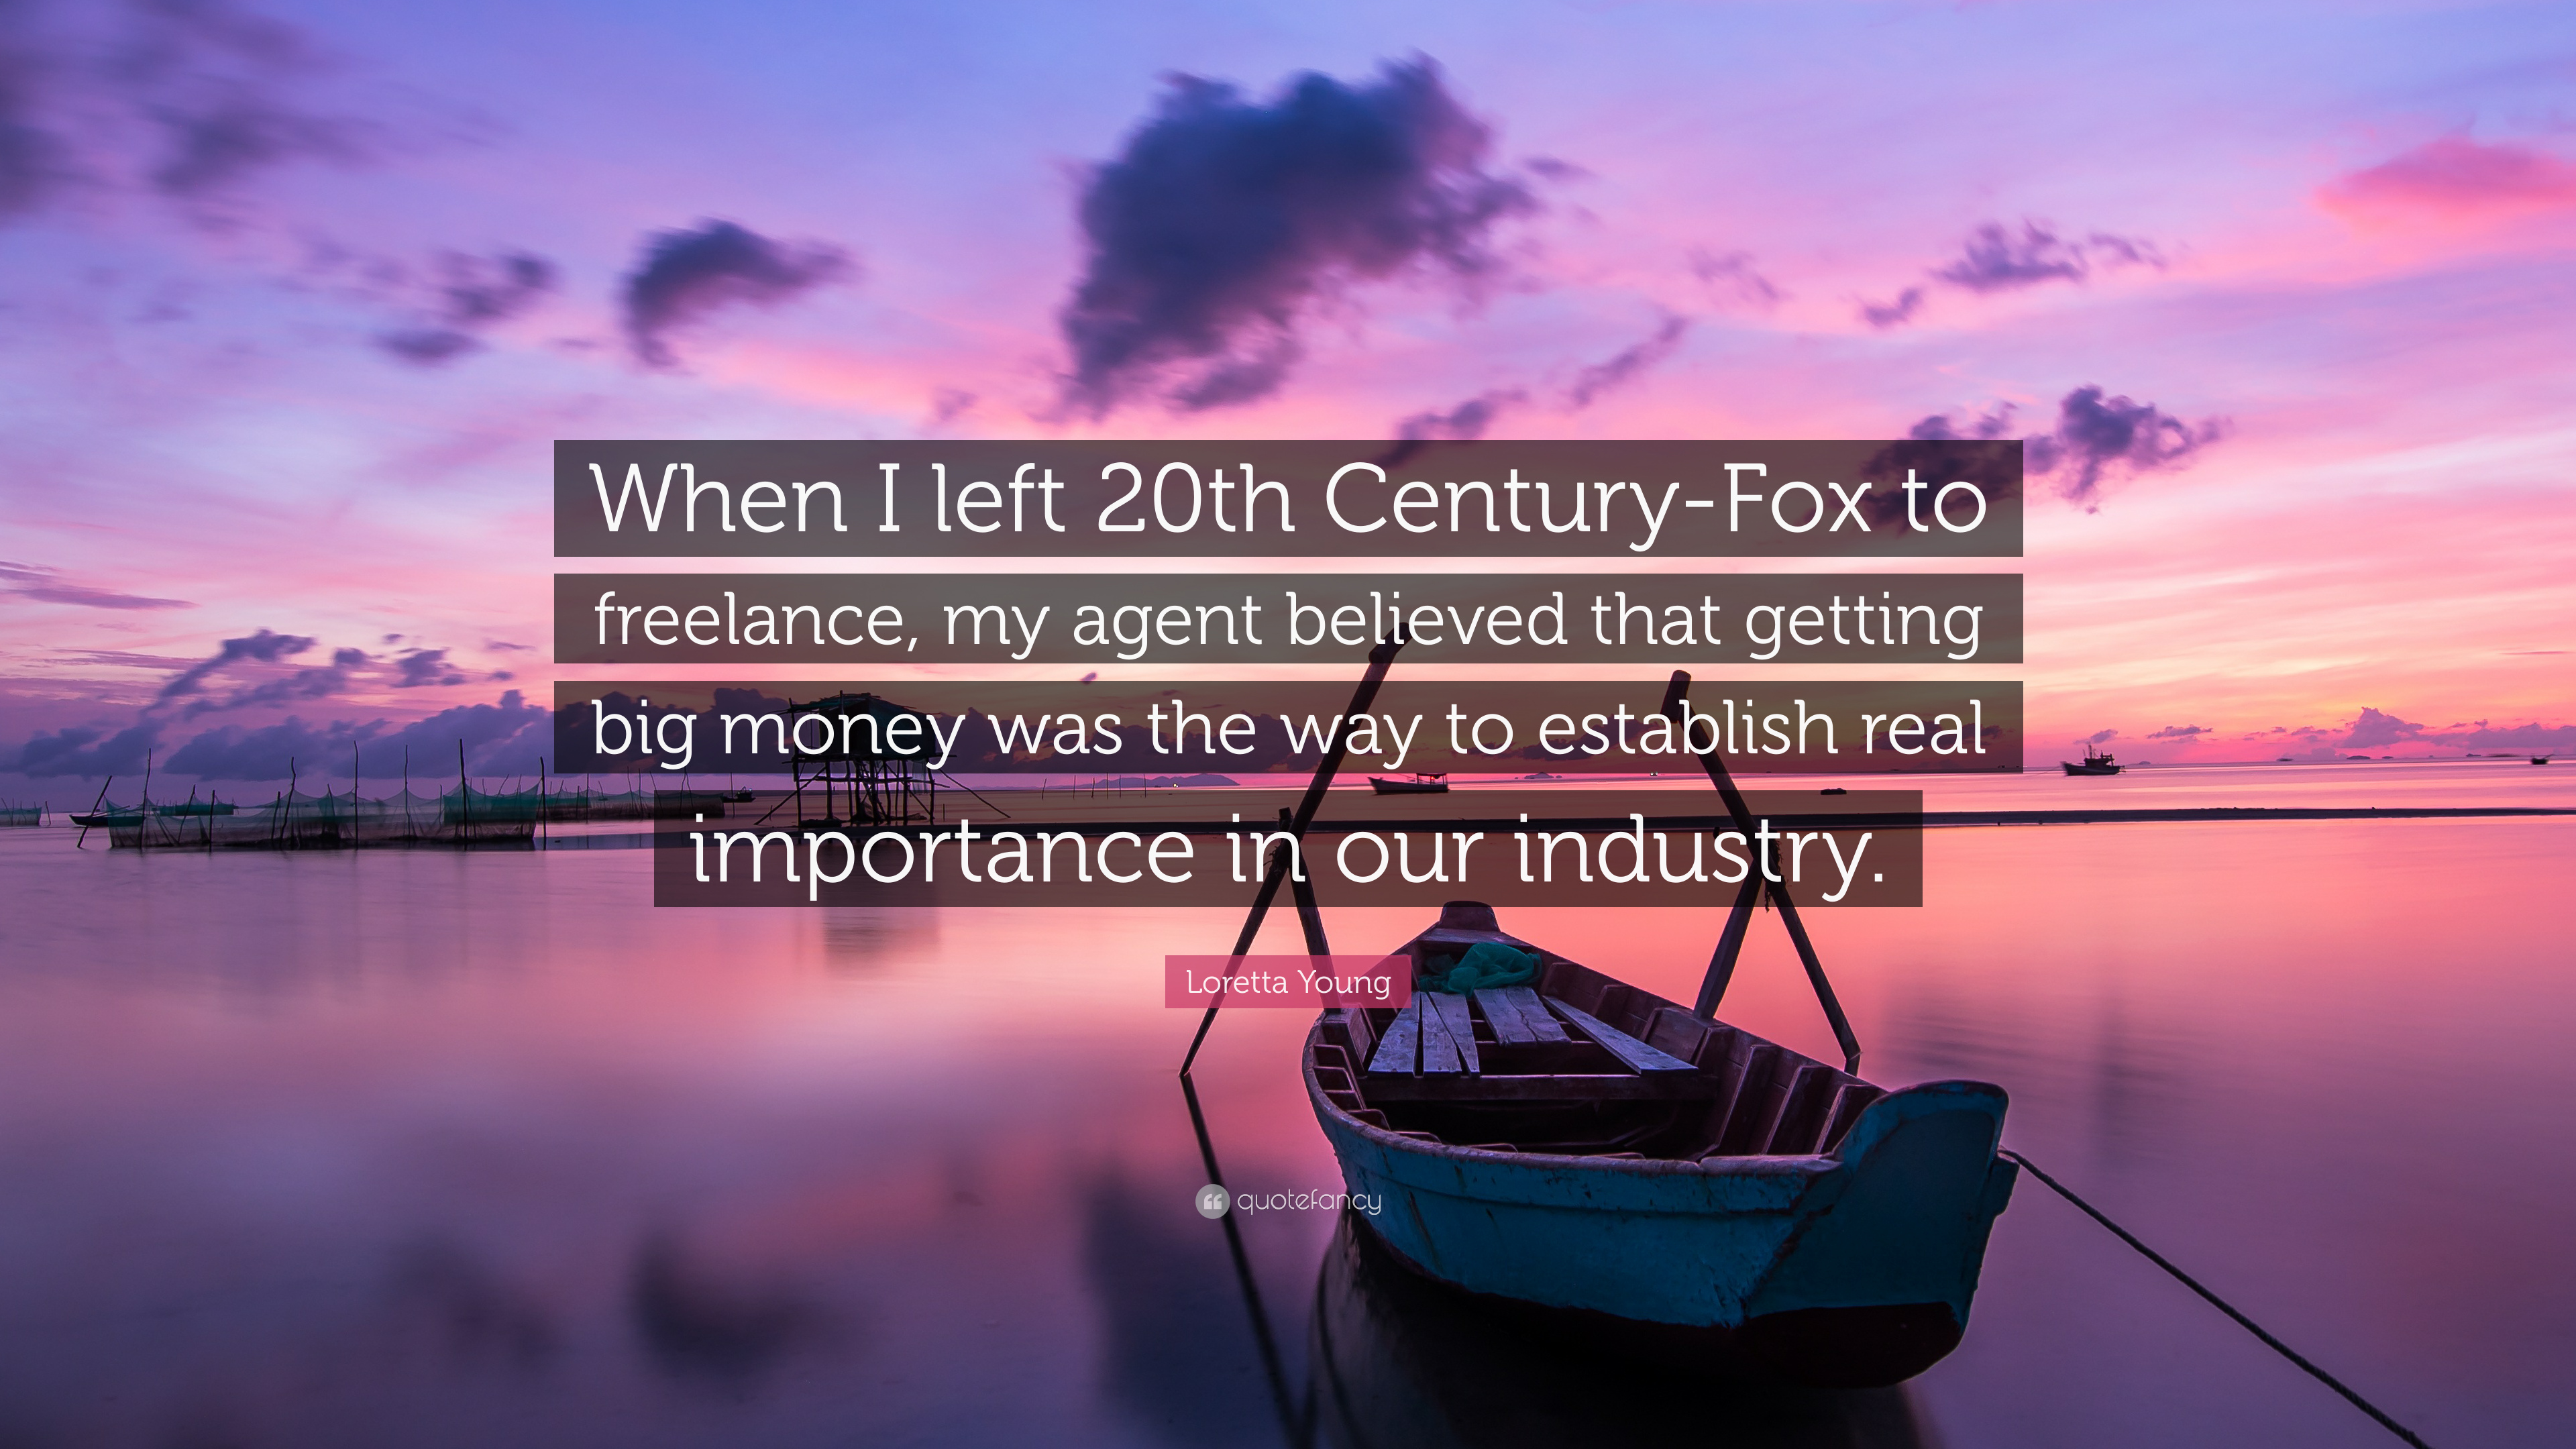 Loretta Young Quote: “When I Left 20th Century Fox To Freelance, My